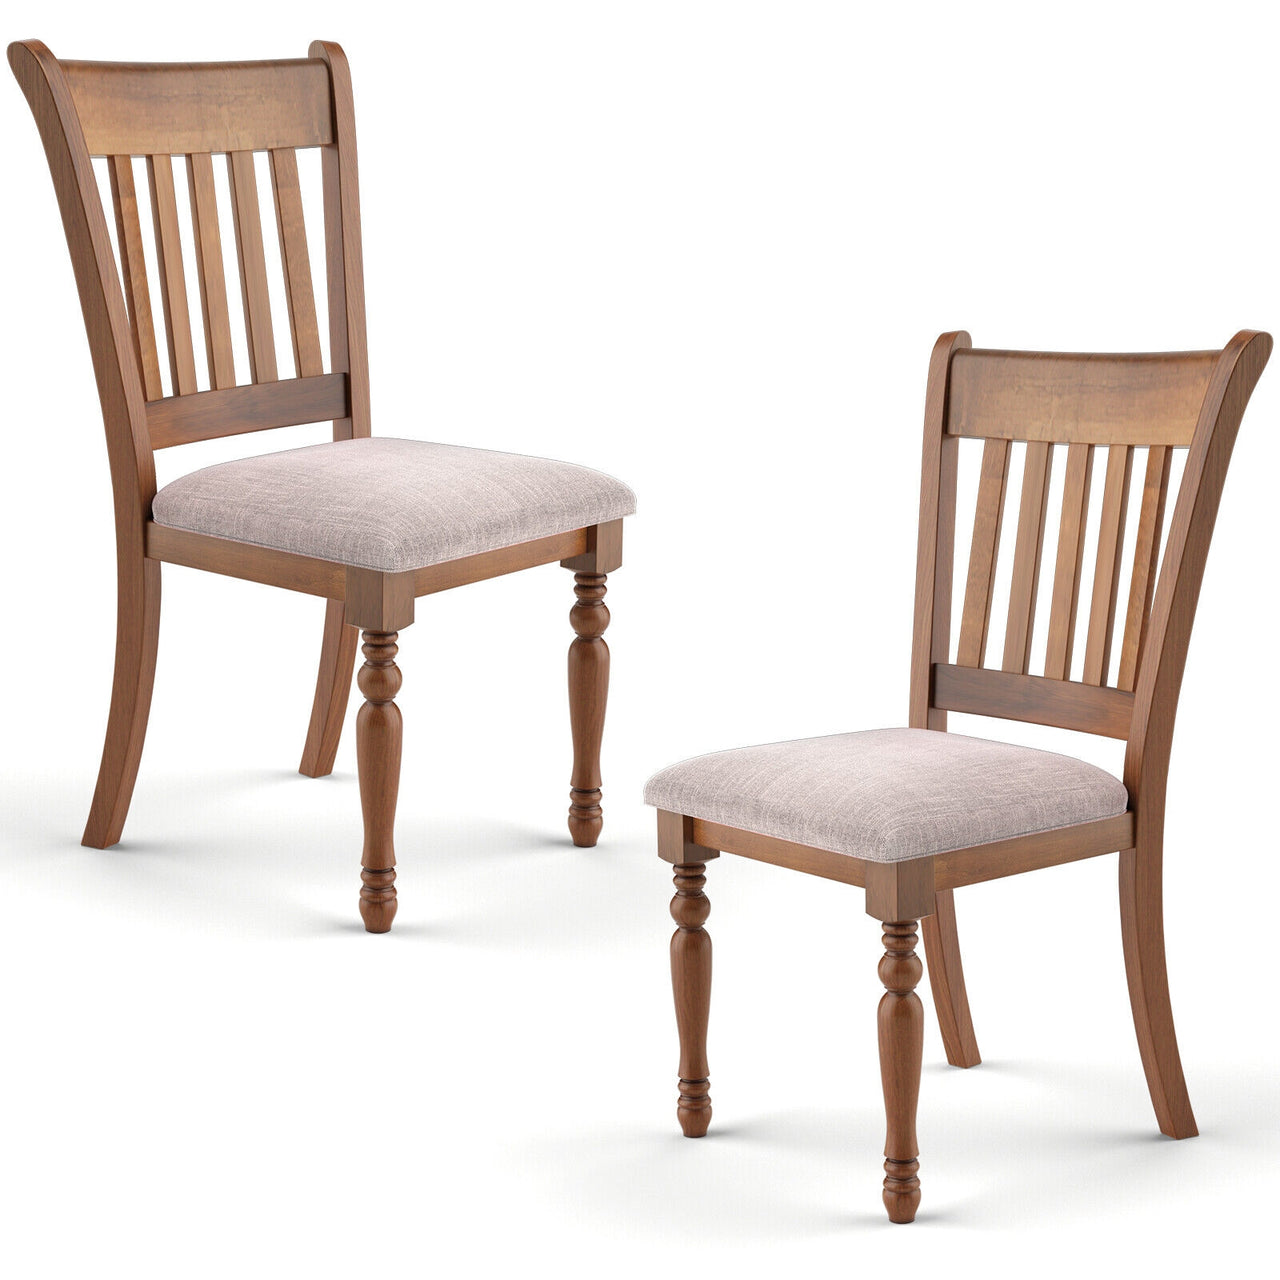 2 Pieces Vintage Wooden Upholstered Dining Chair Set with Padded Cushion - Gallery View 8 of 11